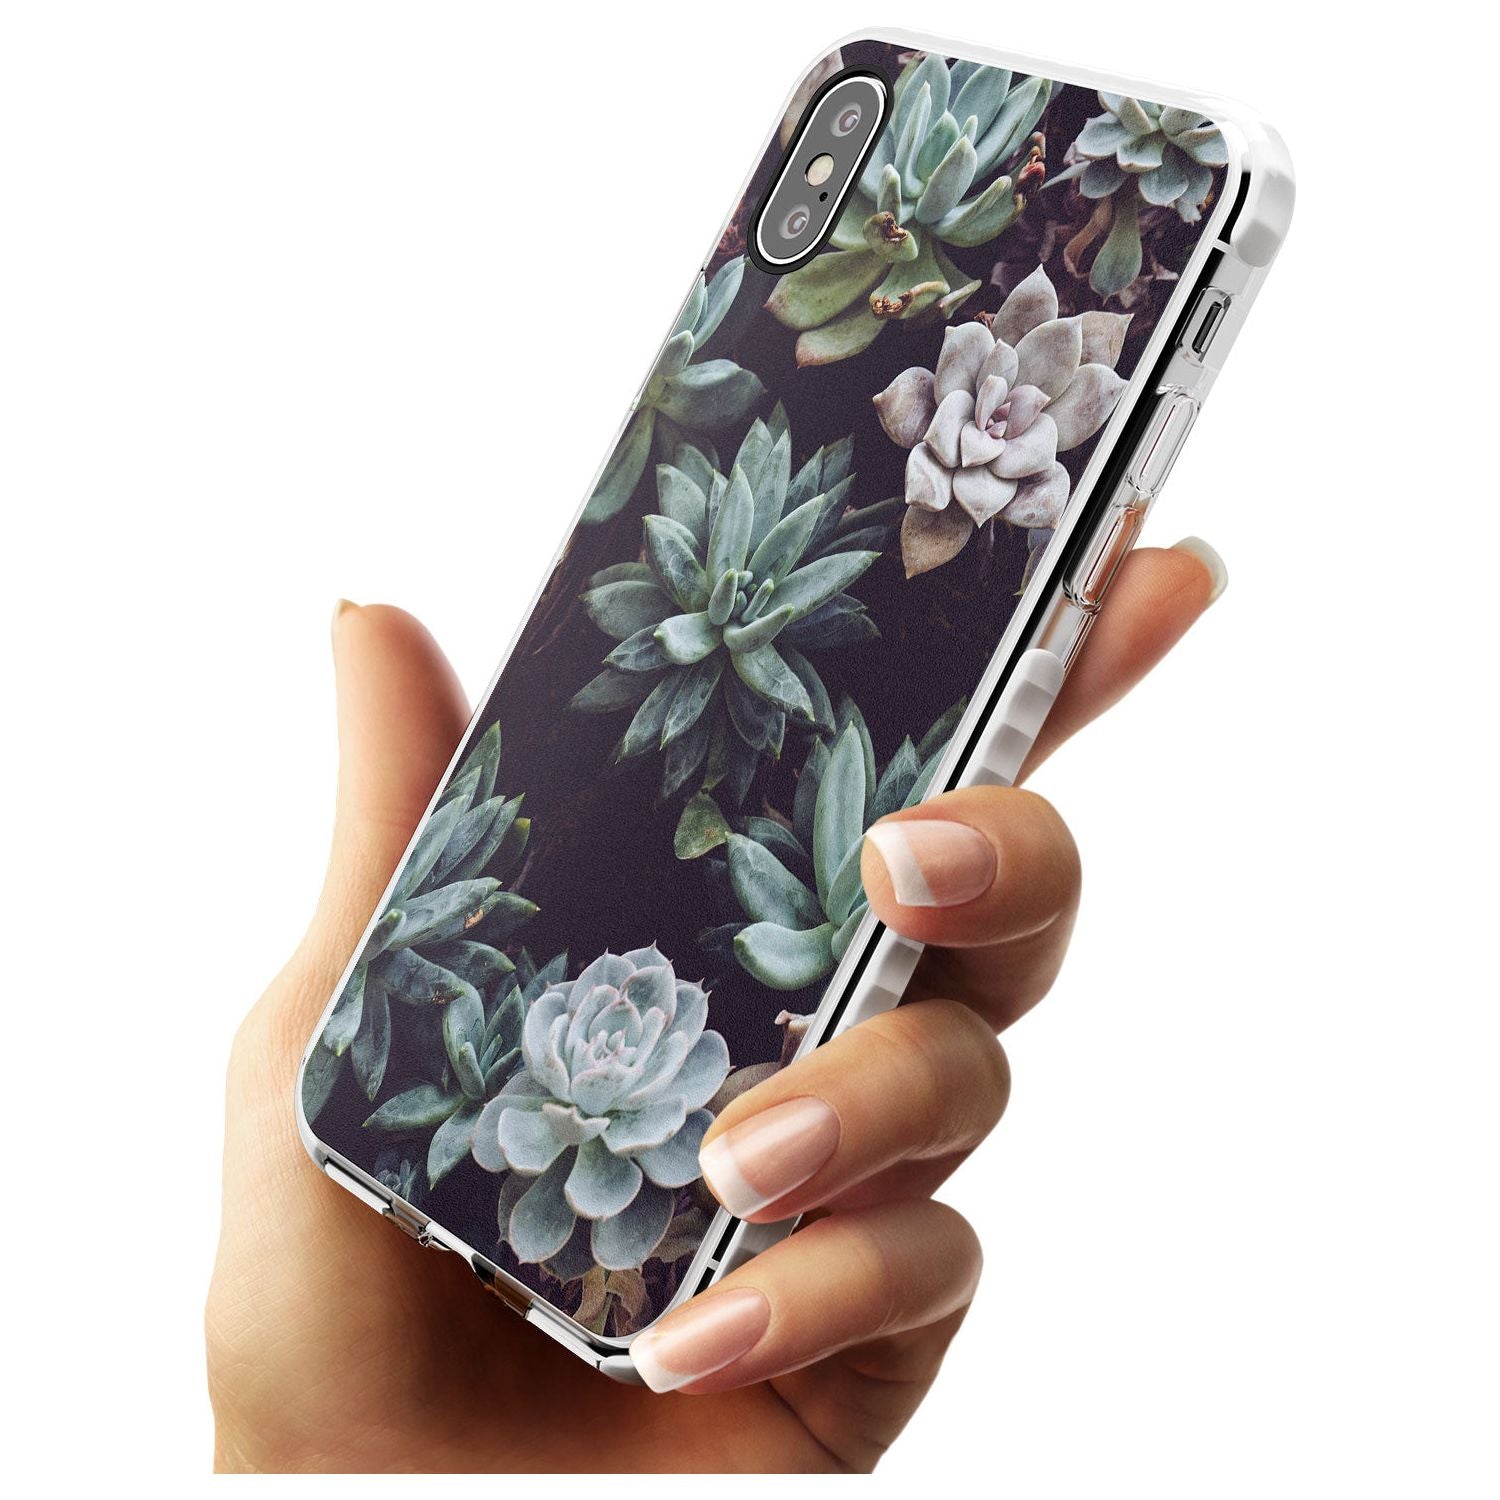 Mixed Succulents - Real Botanical Photographs Impact Phone Case for iPhone X XS Max XR